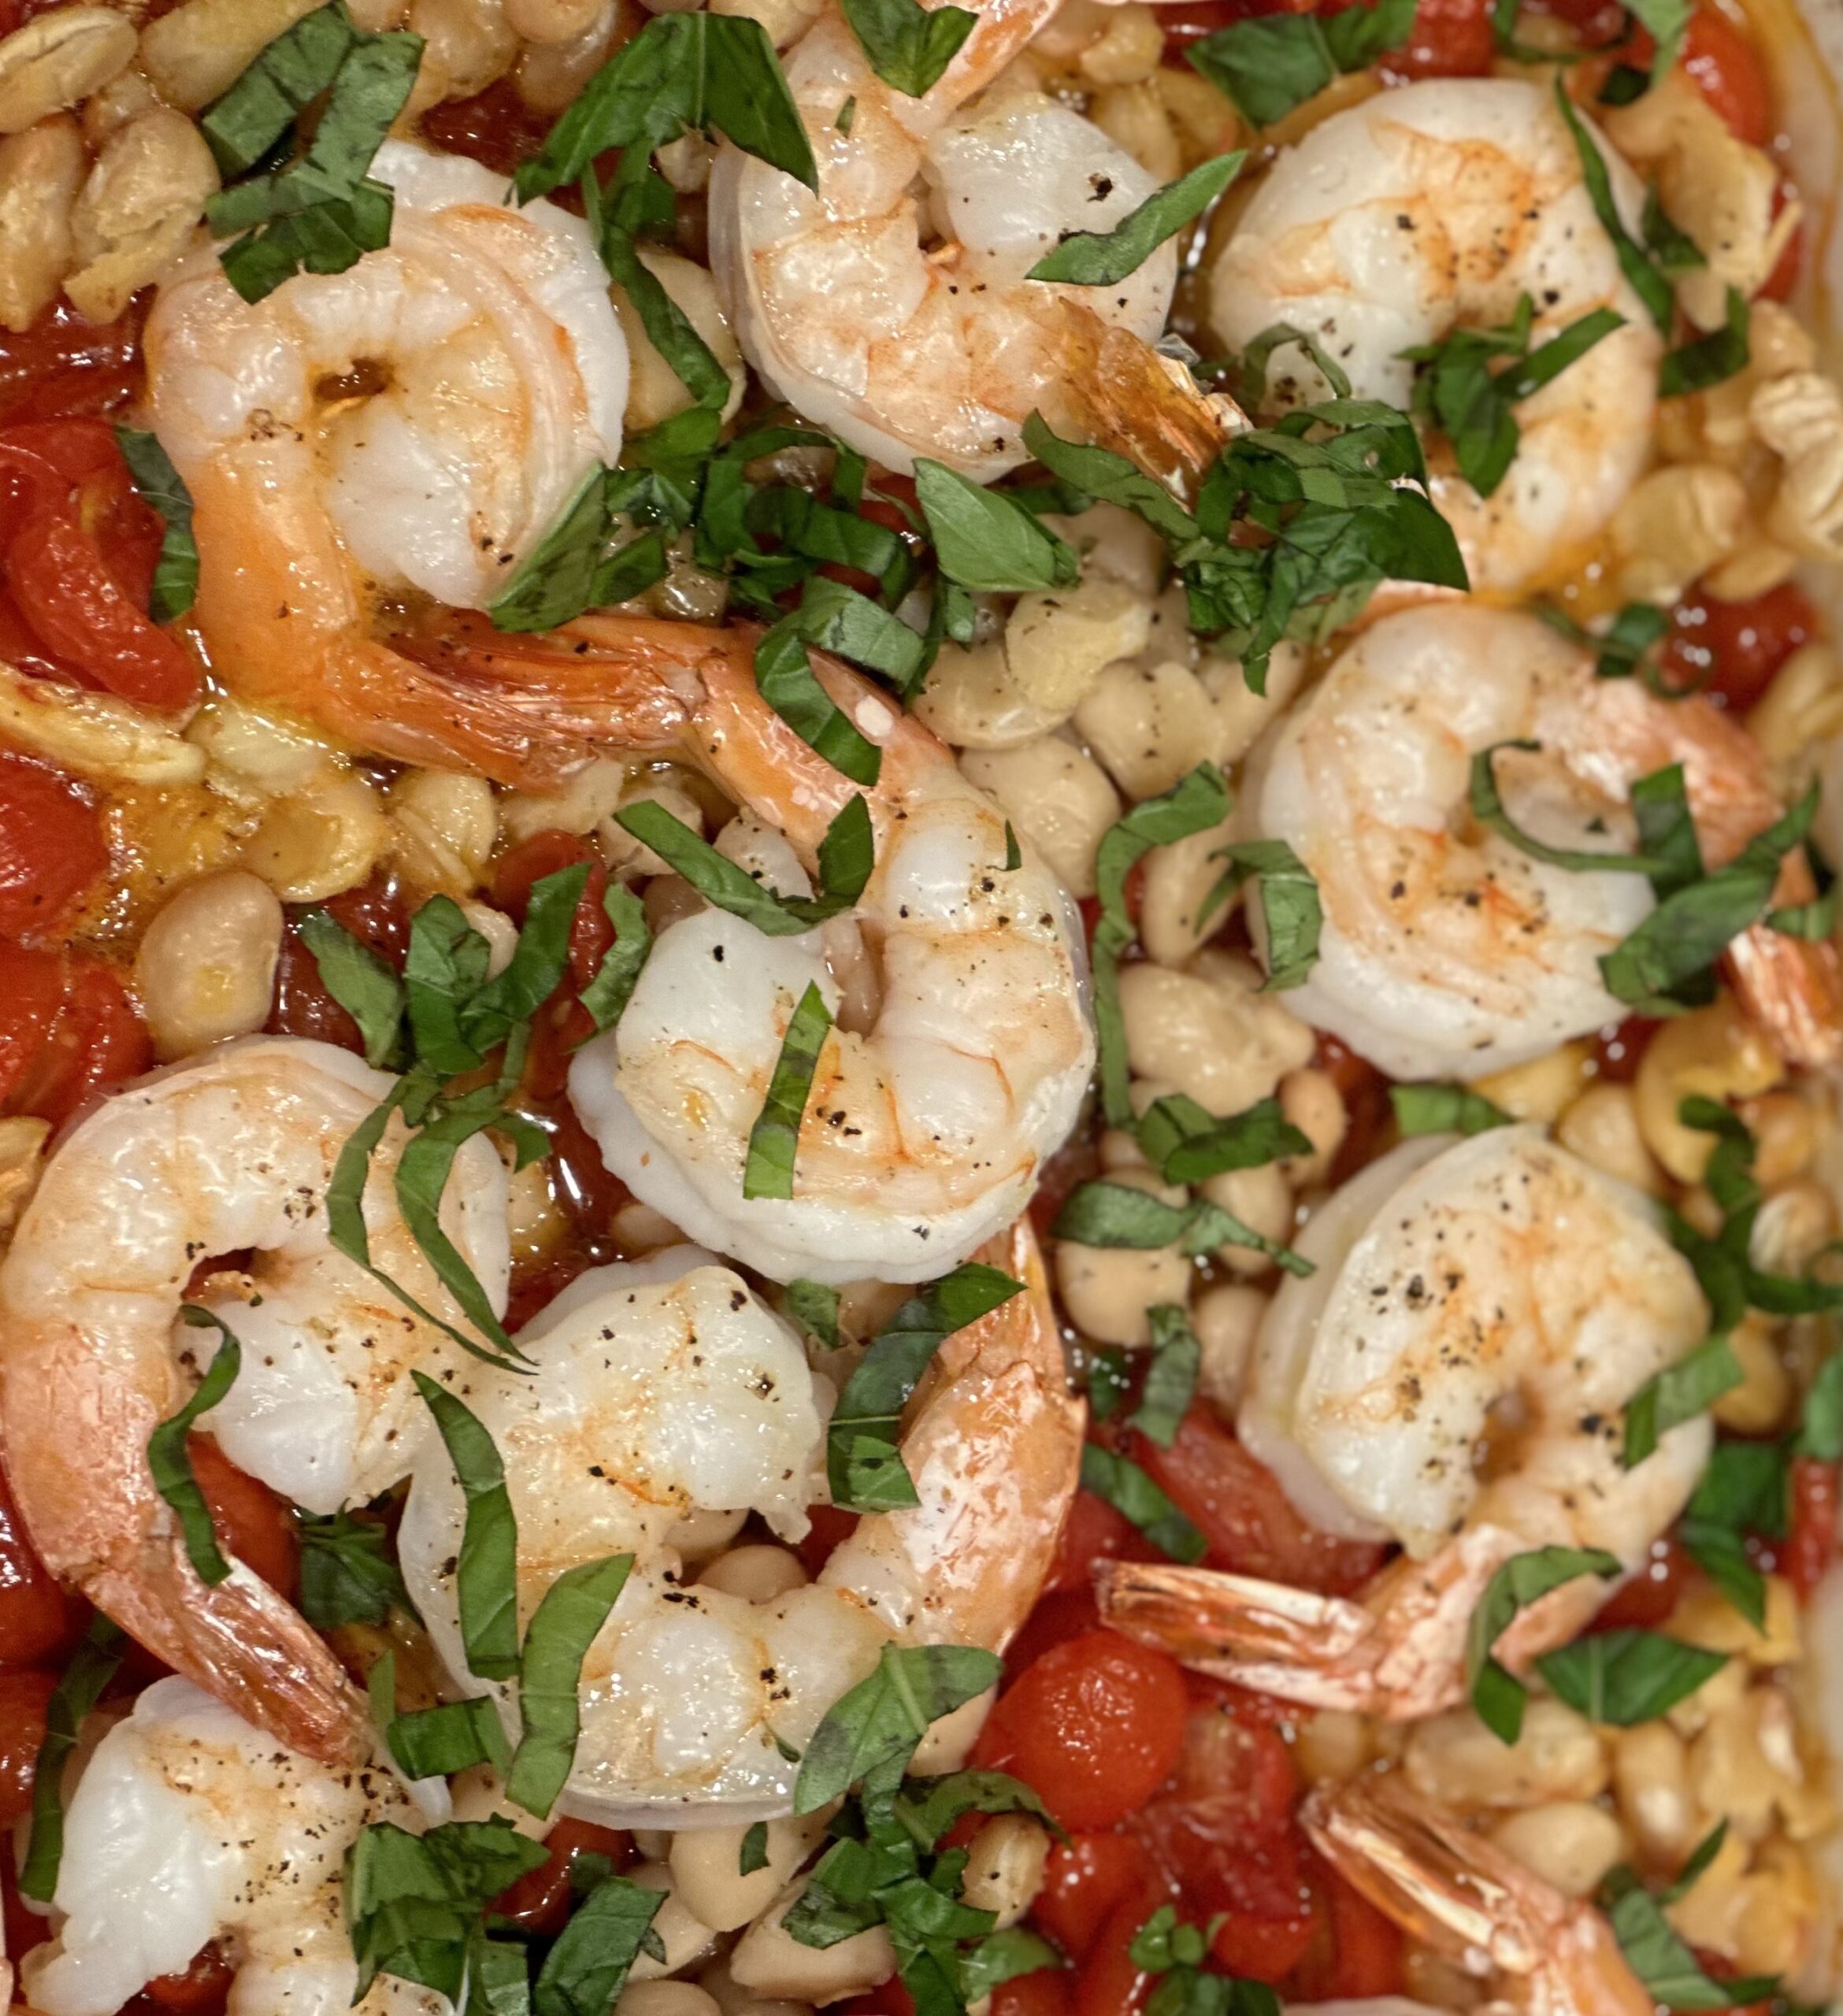 Shrimp with beans and roasted tomatoes